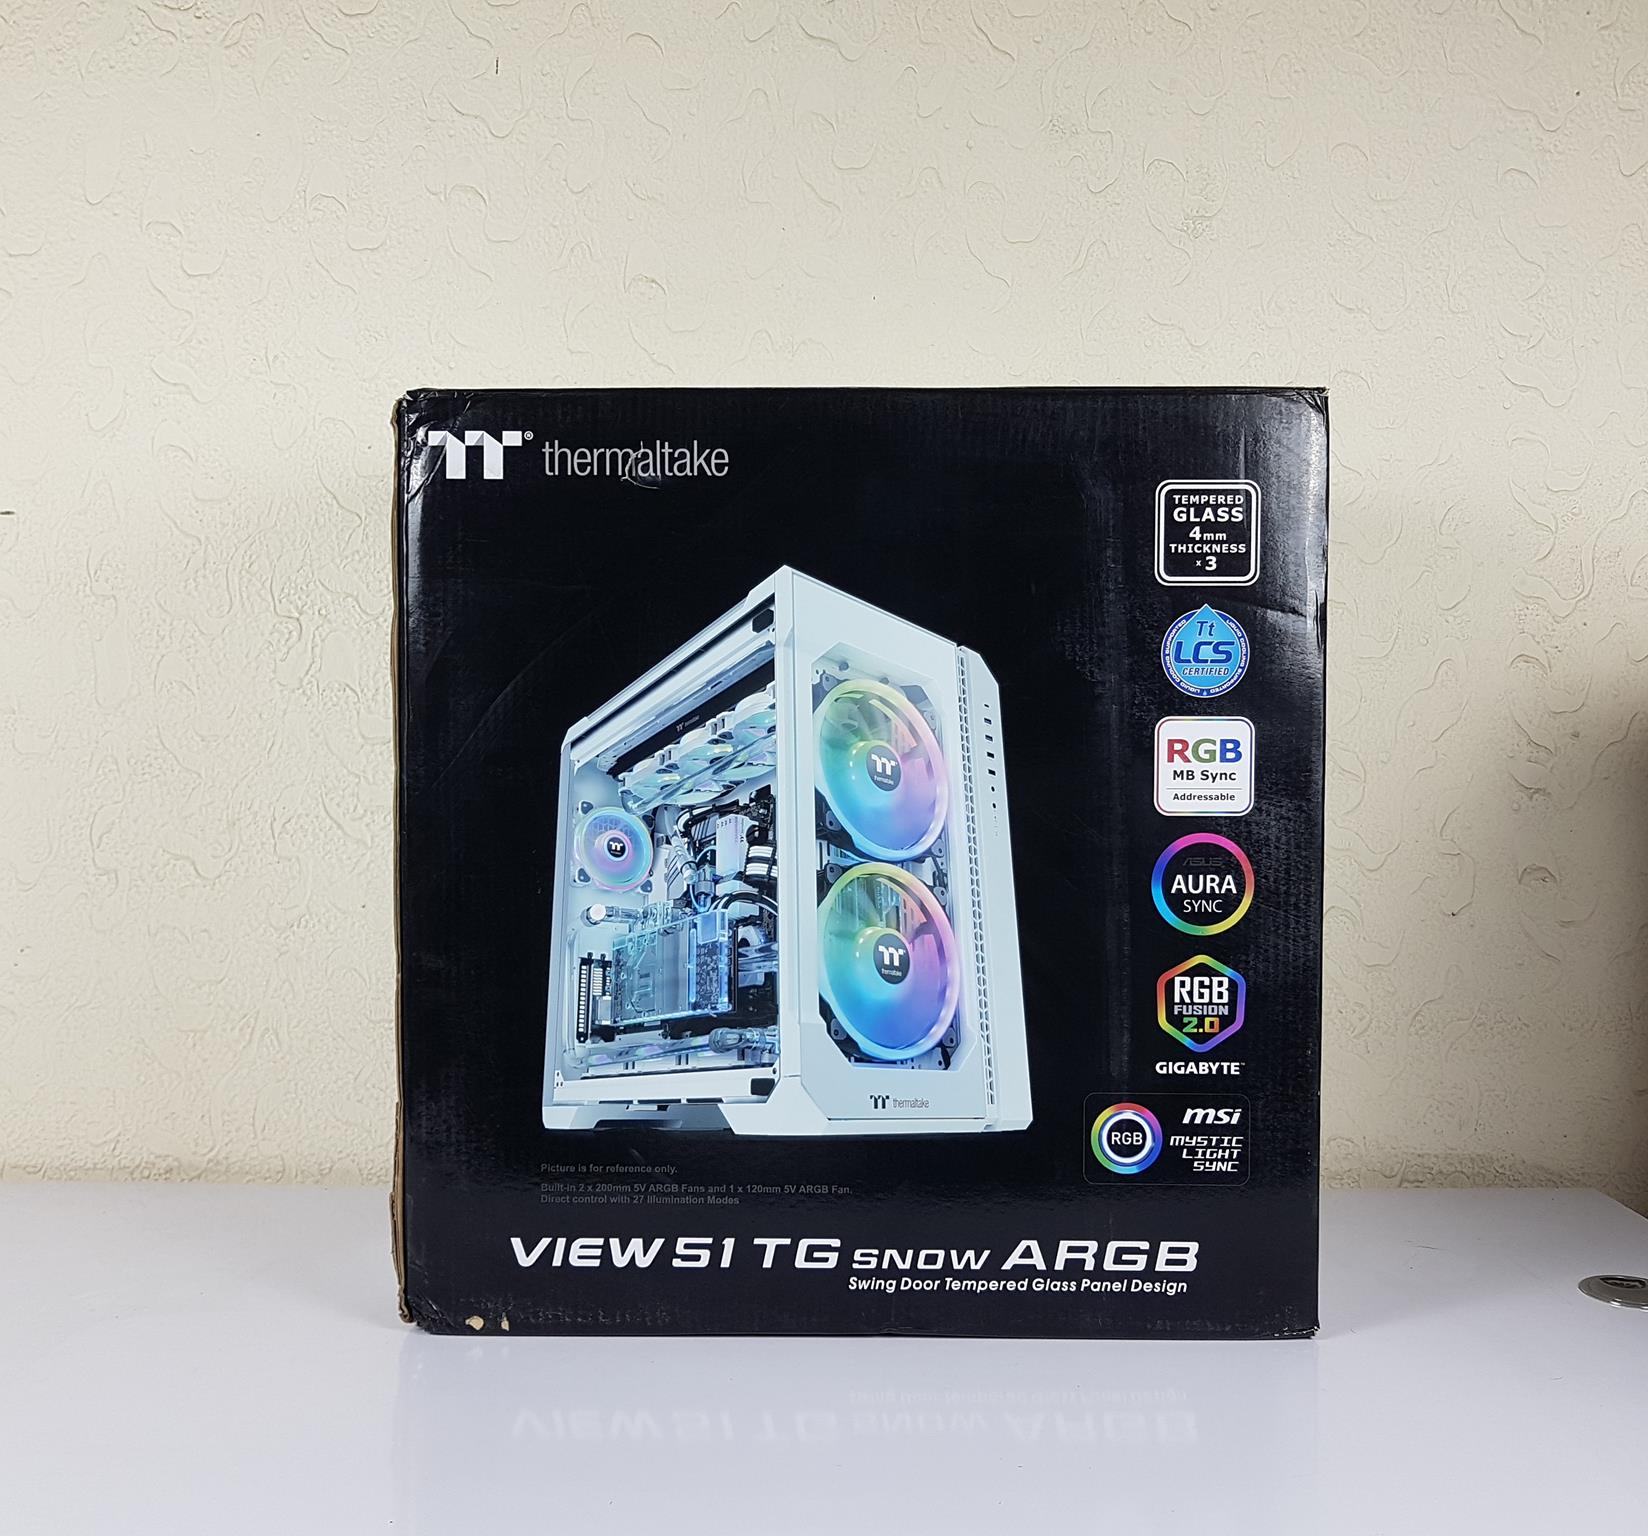 thermaltake view 51 Packaging and Unboxing